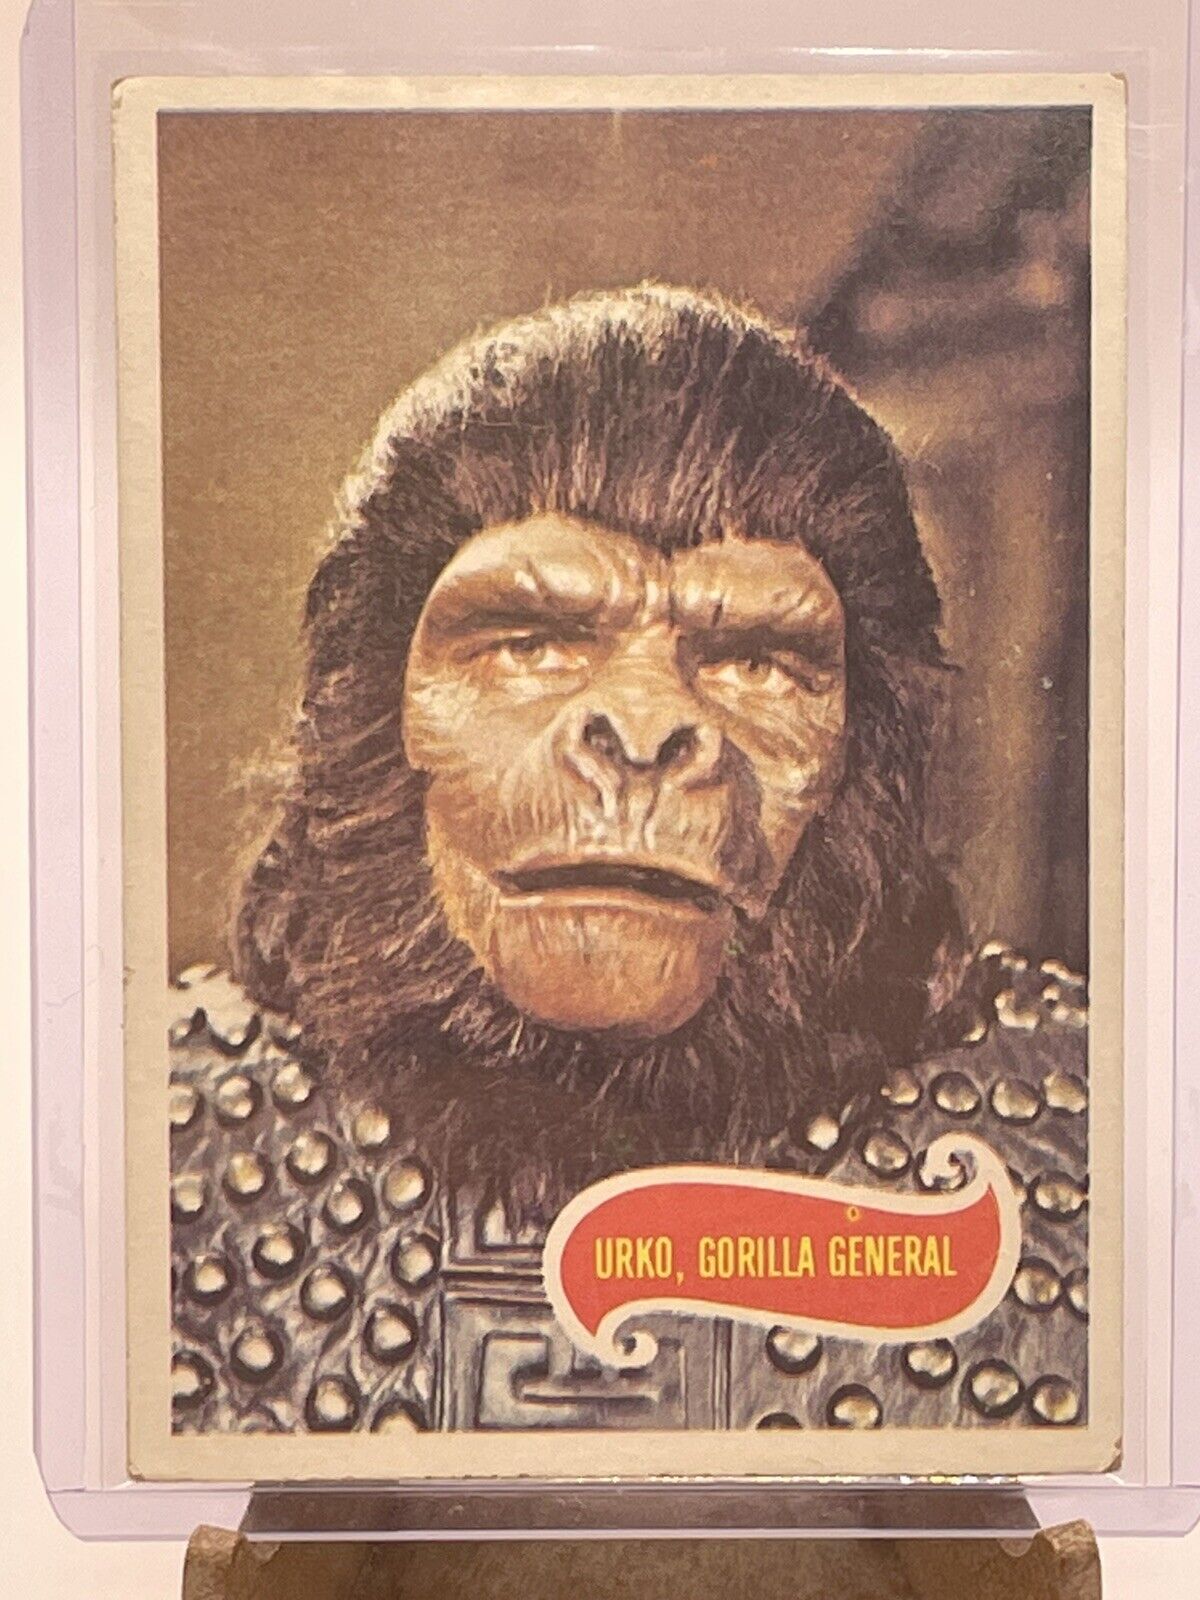 Planet Of The Apes 1975 TOPPS CARD #5 ‘Urko, Gorilla General’